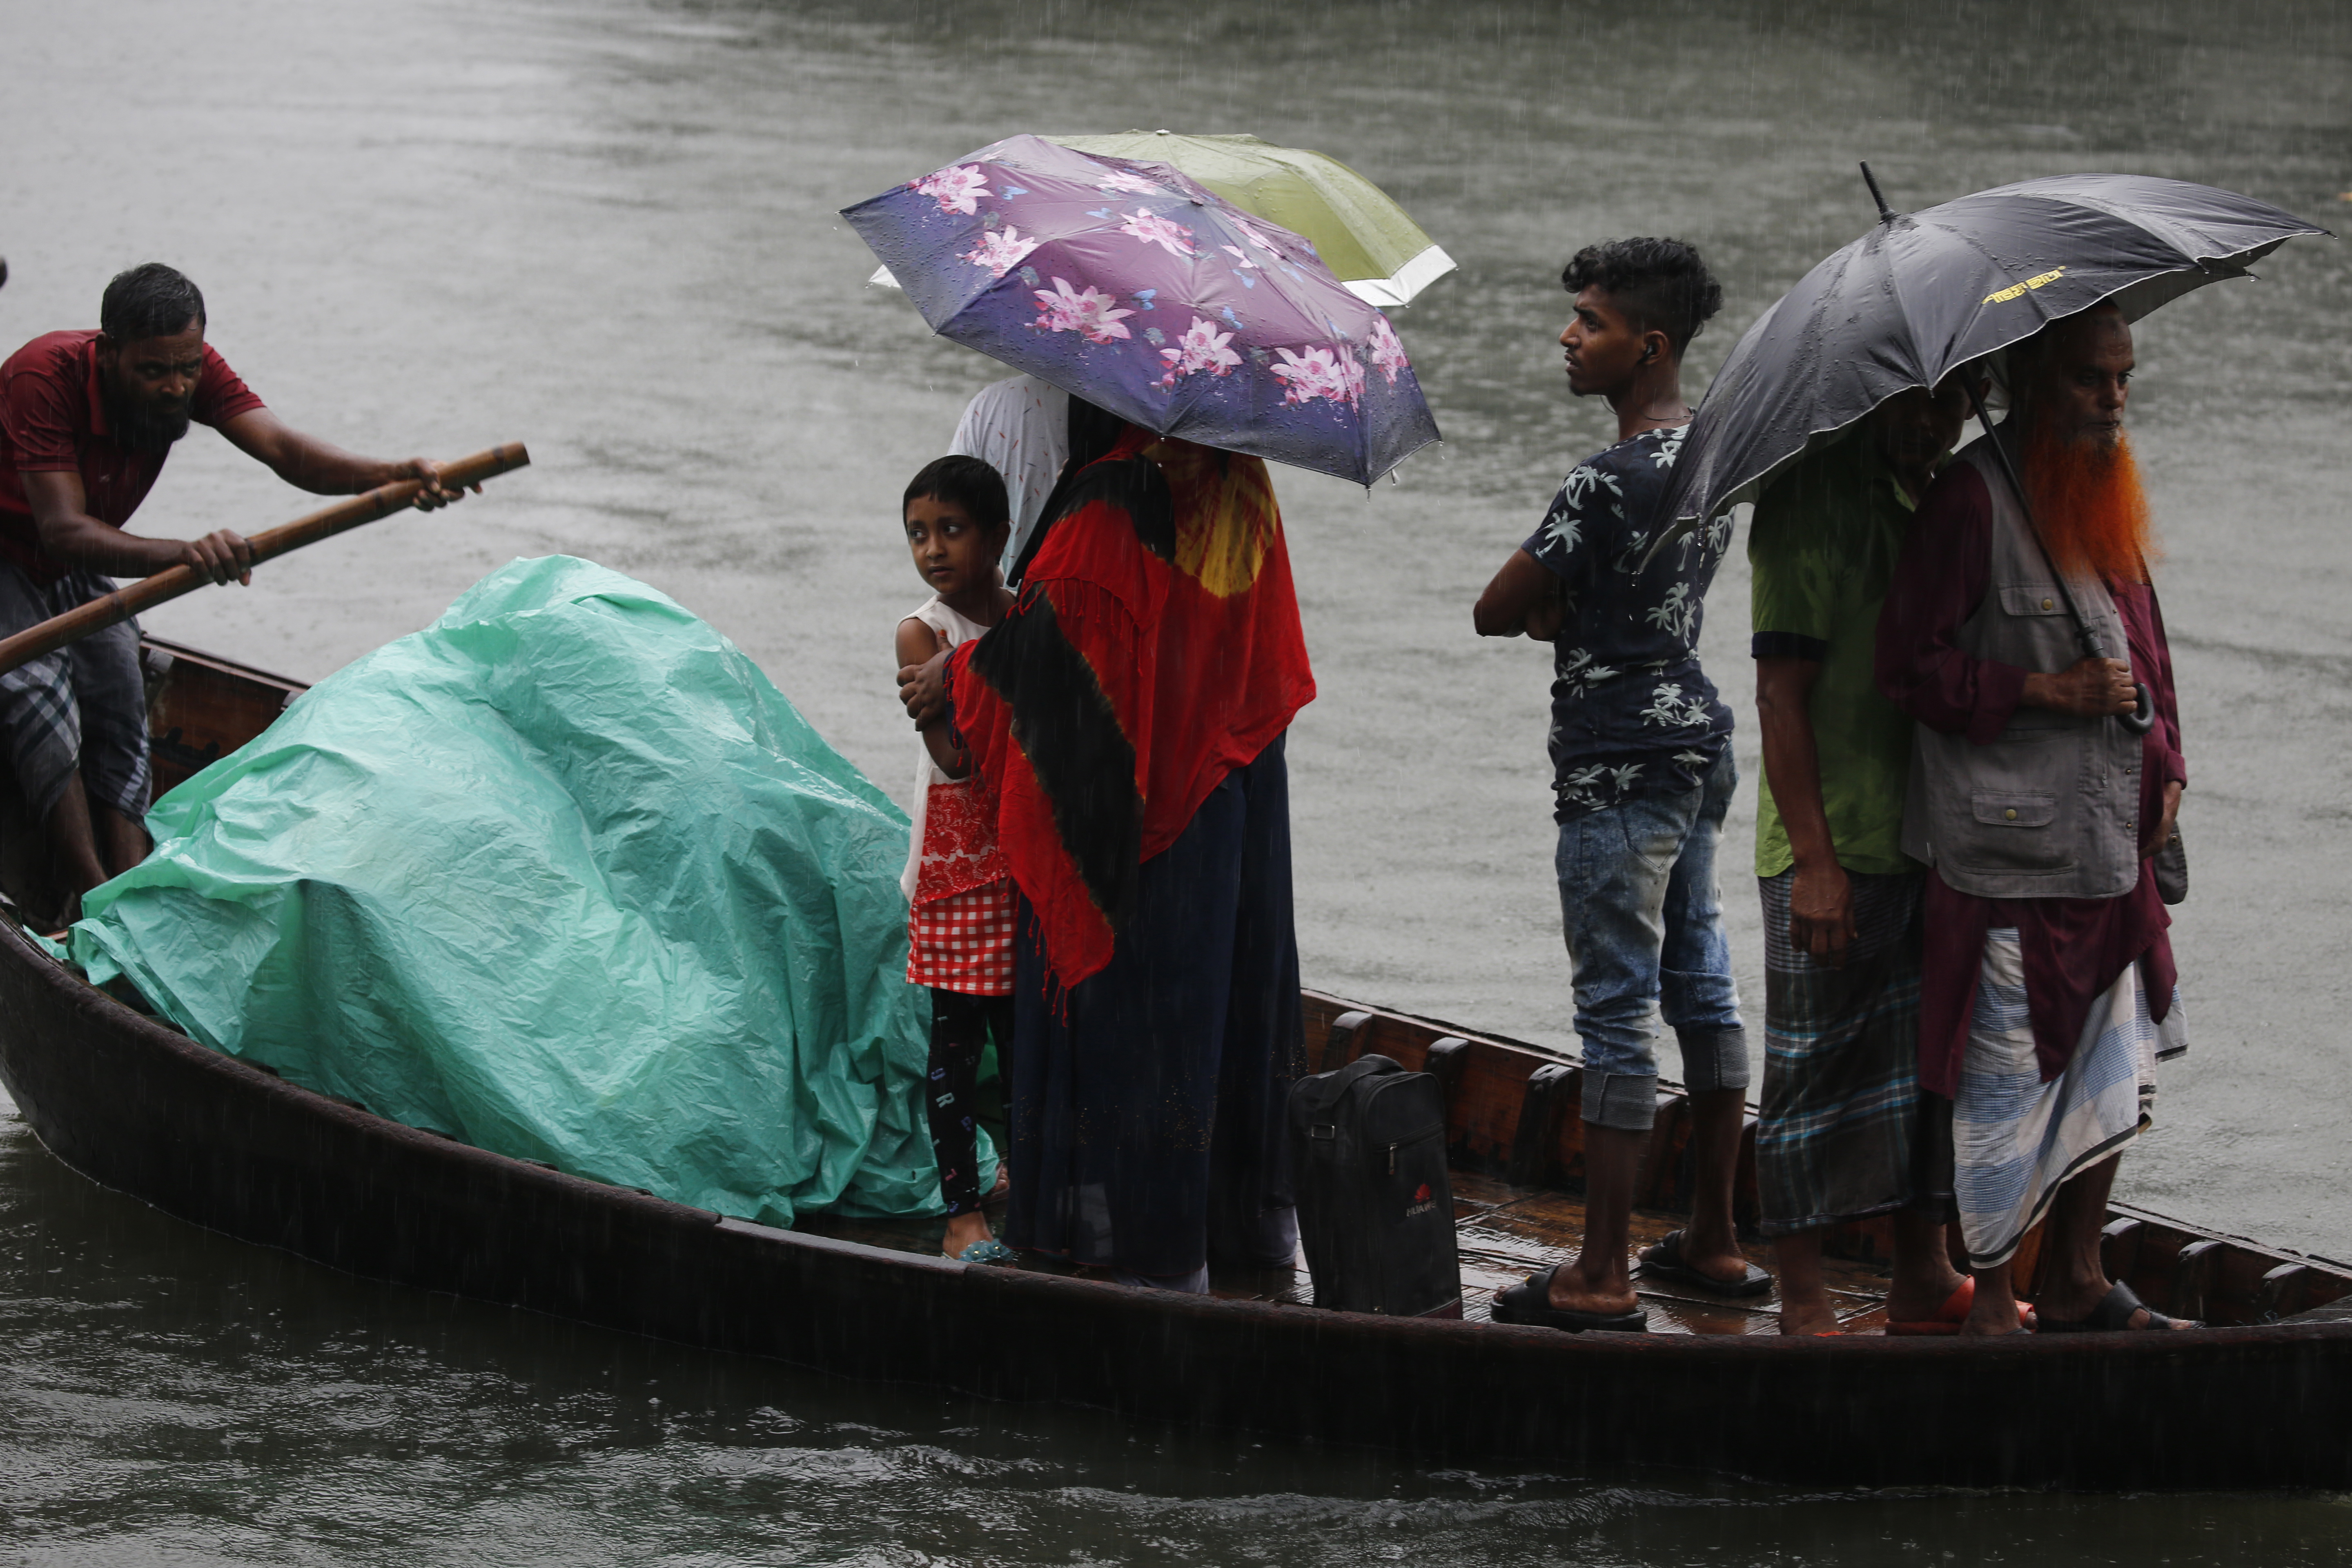 epa07983072 Bangladeshi passengers cover themselves with a plastic sheet and umbrellas as they cross the Buriganga River by boat during a rainy day in Dhaka, Bangladesh, 09 November 2019. According to the Bangladesh Inland Water Transport Authority (BIWTA) and Bangladesh Meteorology Department, the suspended inland water transport in approaching of Cyclone Bulbul, after the cyclone made landfall in the world's largest mangrove forest Sundarbans and passes through the coastal areas in Khulna and West Bengal state.  EPA/MONIRUL ALAM